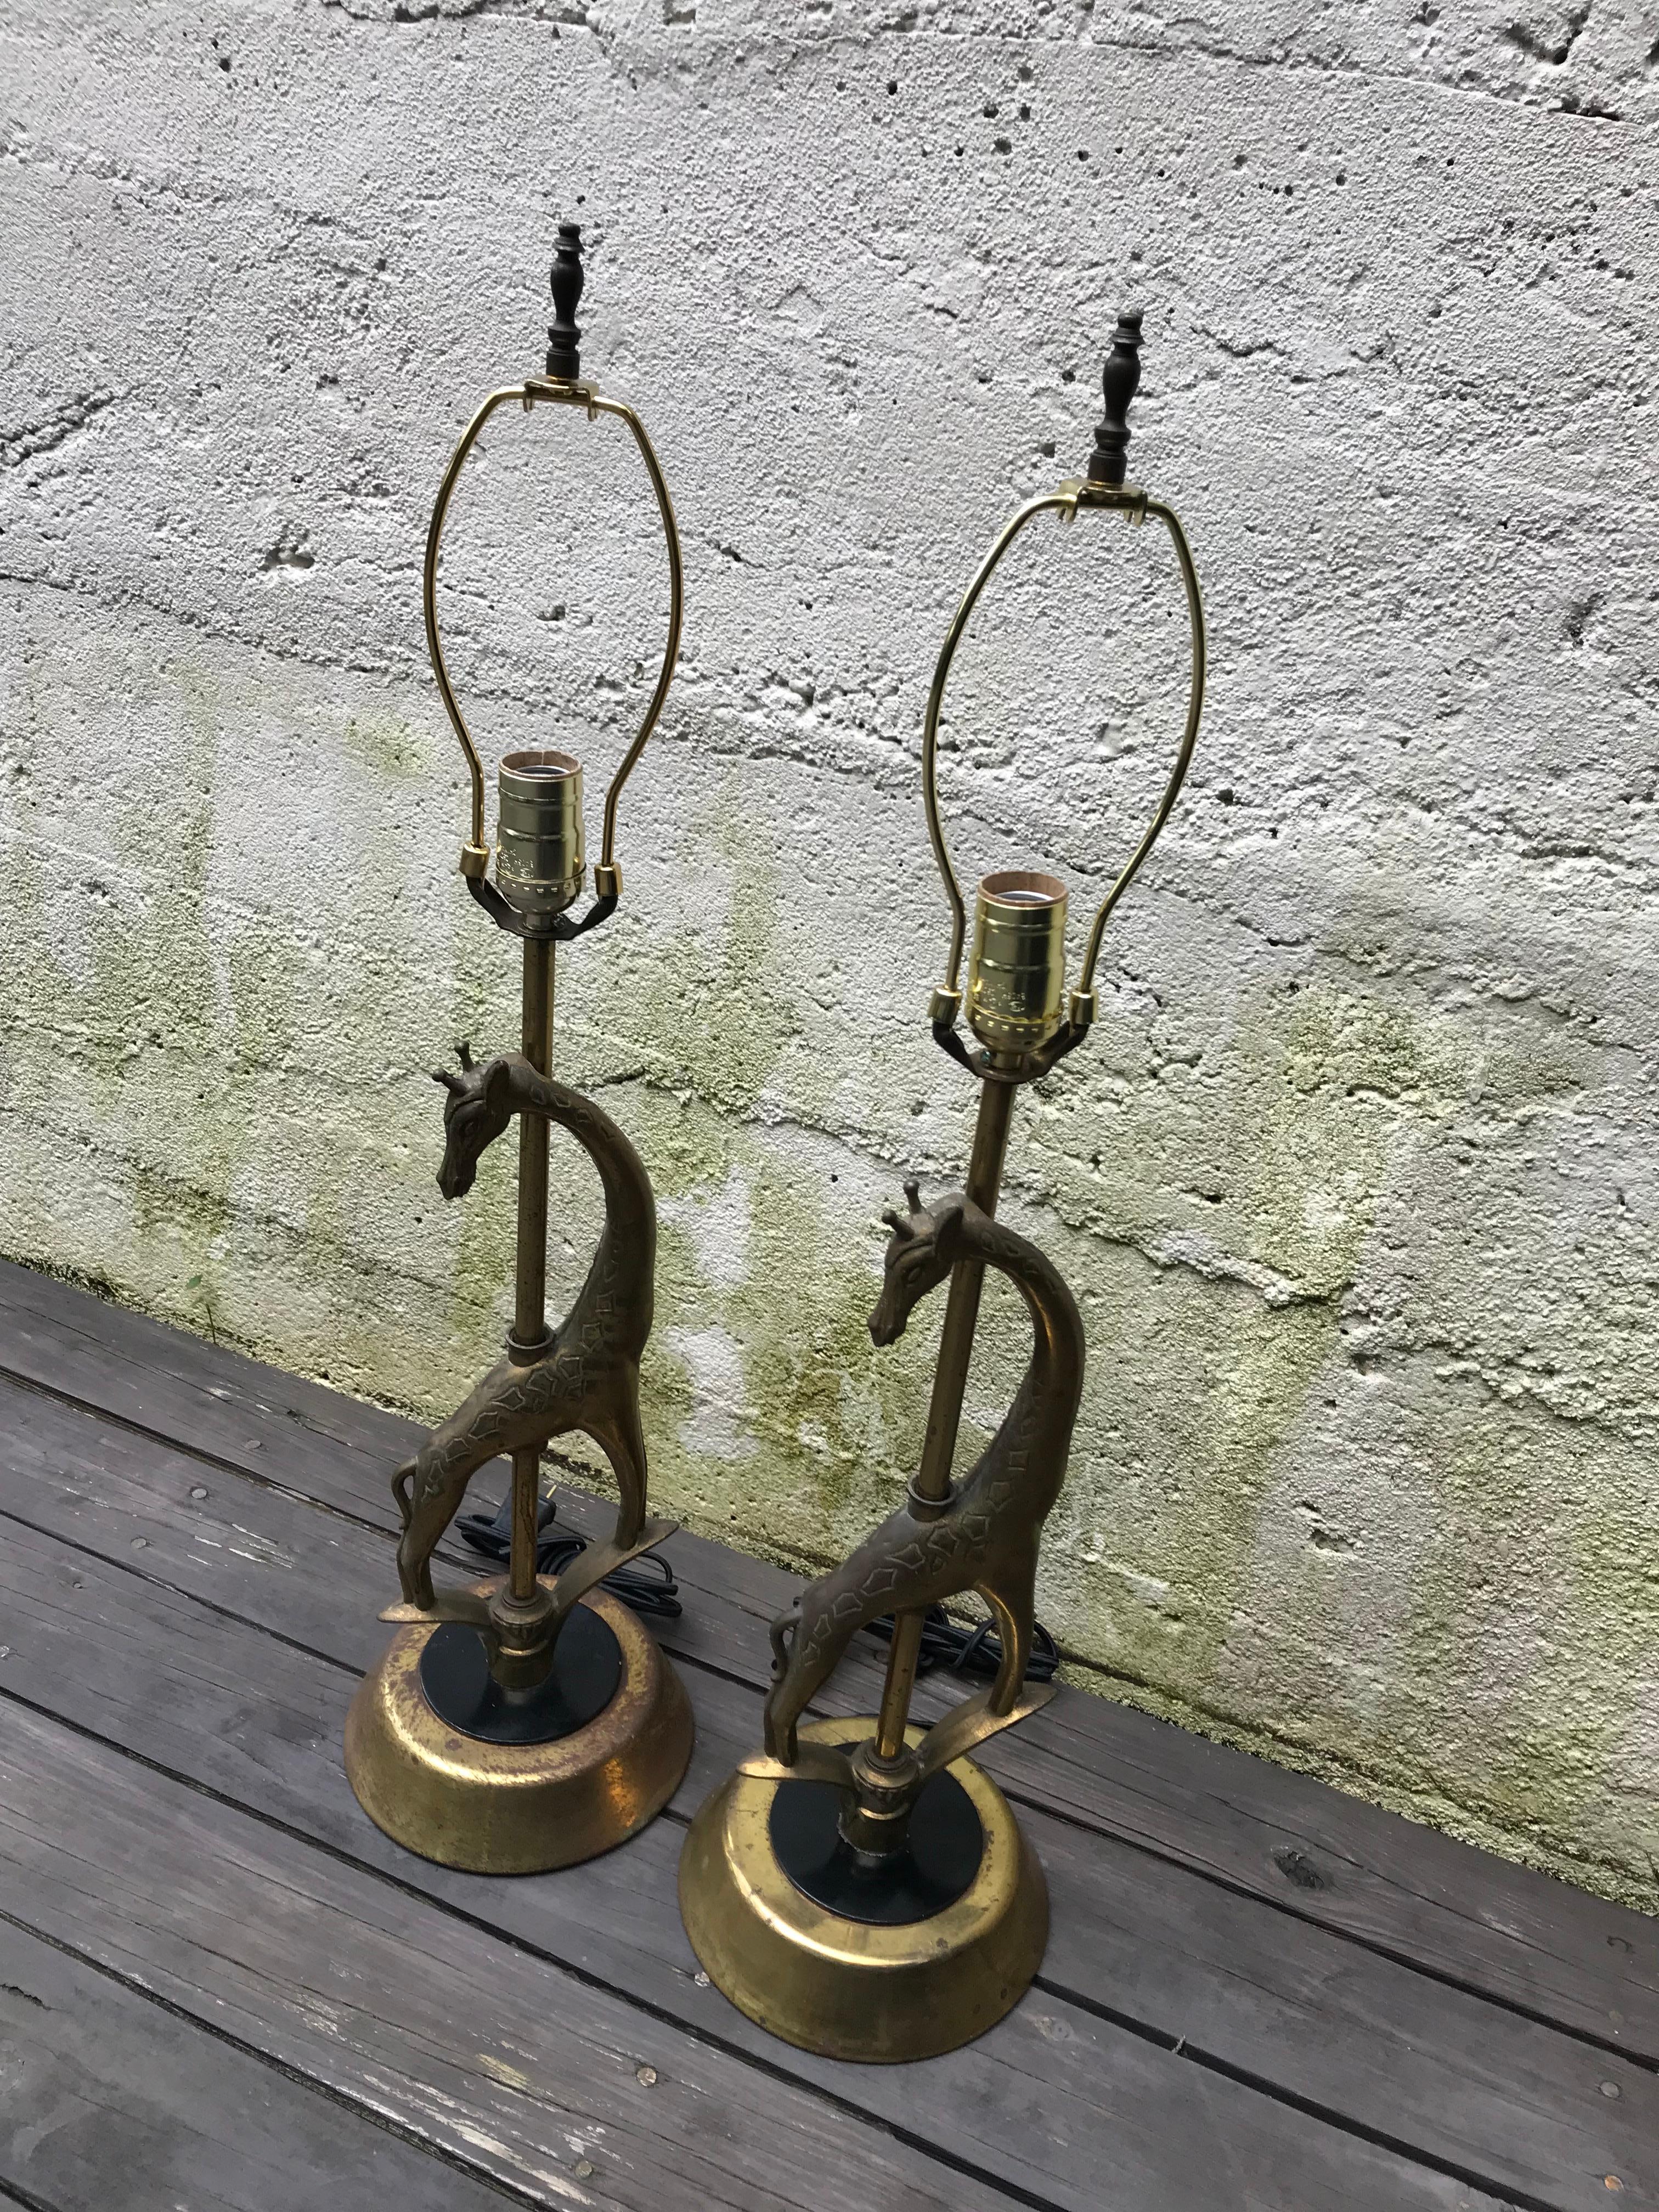 American Pair of Mid Century Sculptural Giraffe Table Lamps by Rembrandt Lamp Co. 1950s For Sale